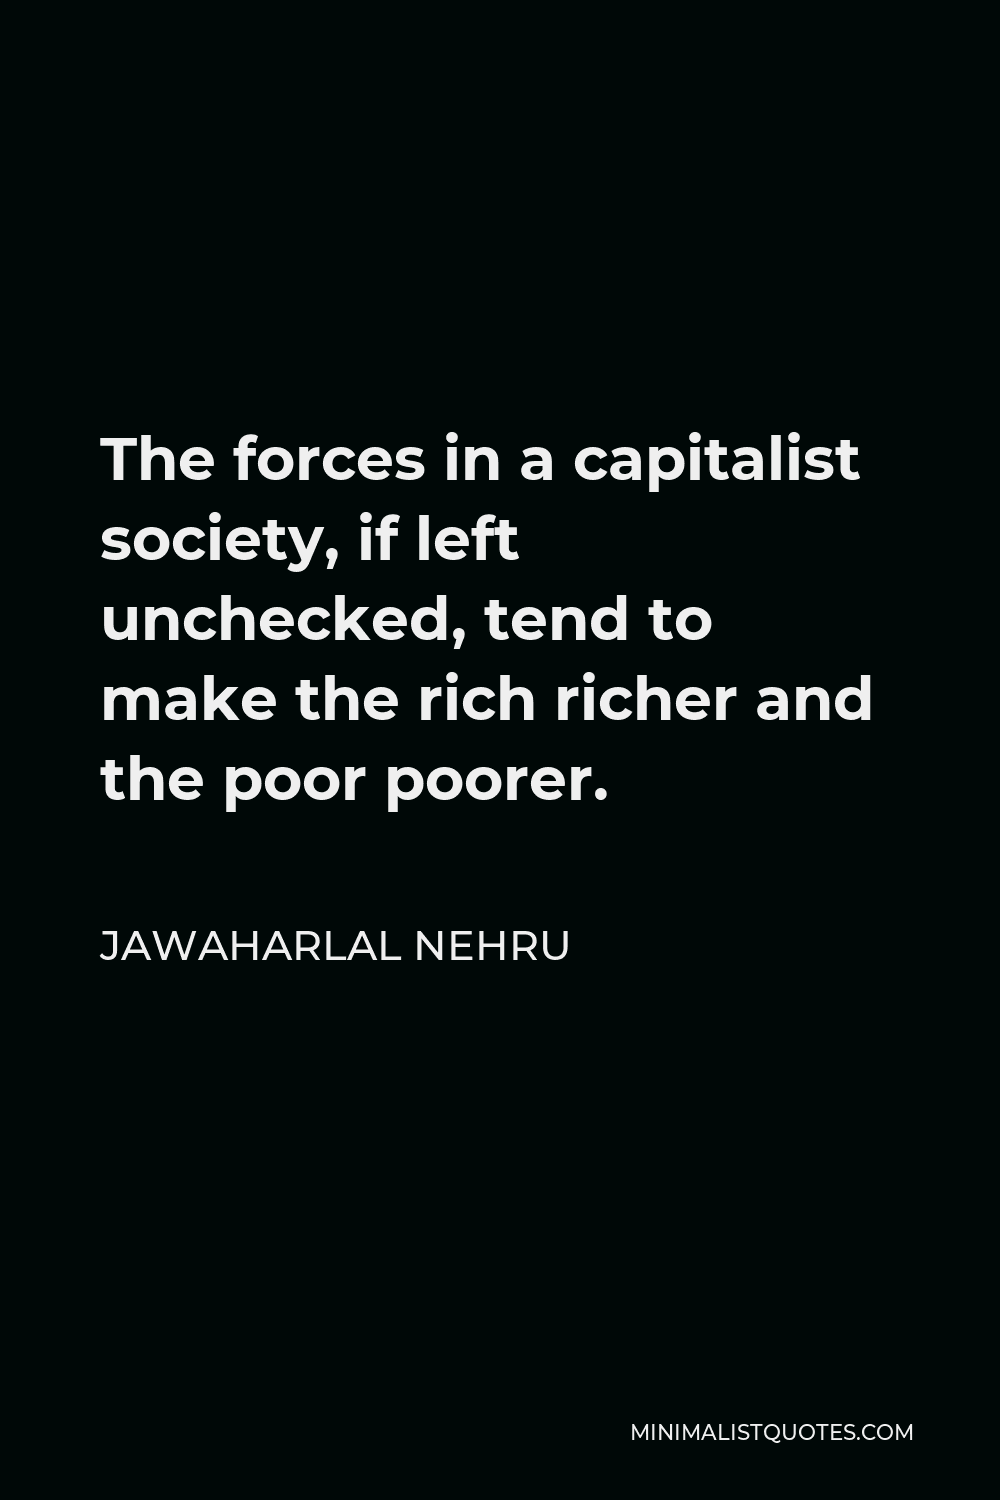 Jawaharlal Nehru Quote - The forces in a capitalist society, if left unchecked, tend to make the rich richer and the poor poorer.